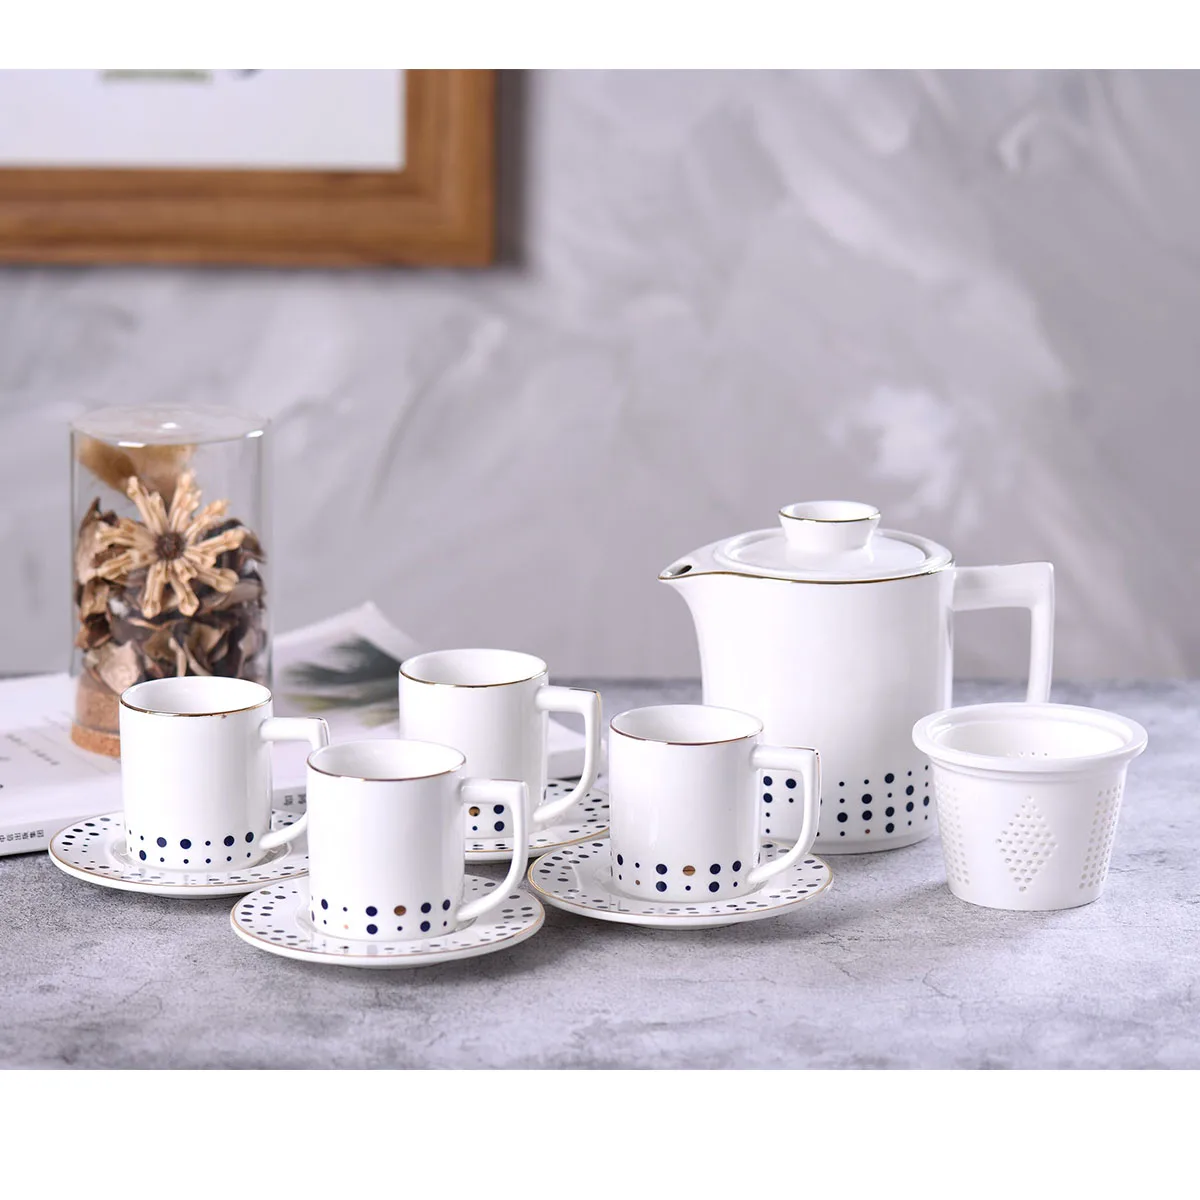 Marble Tea Set Tea Cup Set with Teapot and Saucer Stand Tea Set for Adults Tea Sets for Women Tea Party Service for 6 Tea Cups and Saucers Gray 4OZ Cup 22OZ Teapot 21PCS Set of 6 